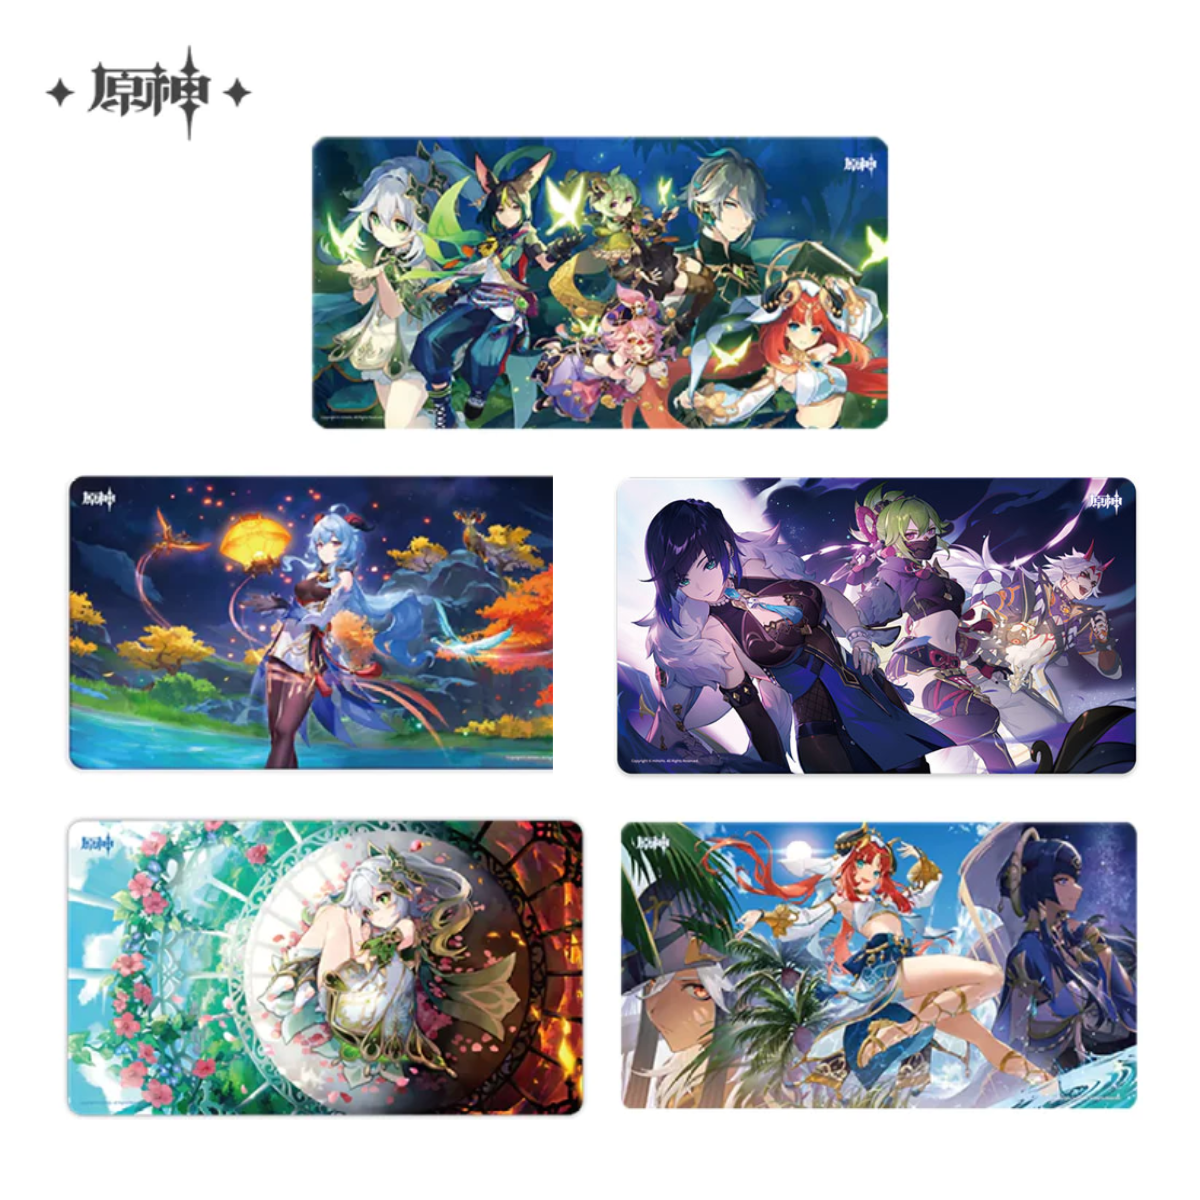 miHoYo Genshin Impact -Hidden Dreams In The Depths A Pattern - Theme Mousepad-miHoYo-Ace Cards &amp; Collectibles